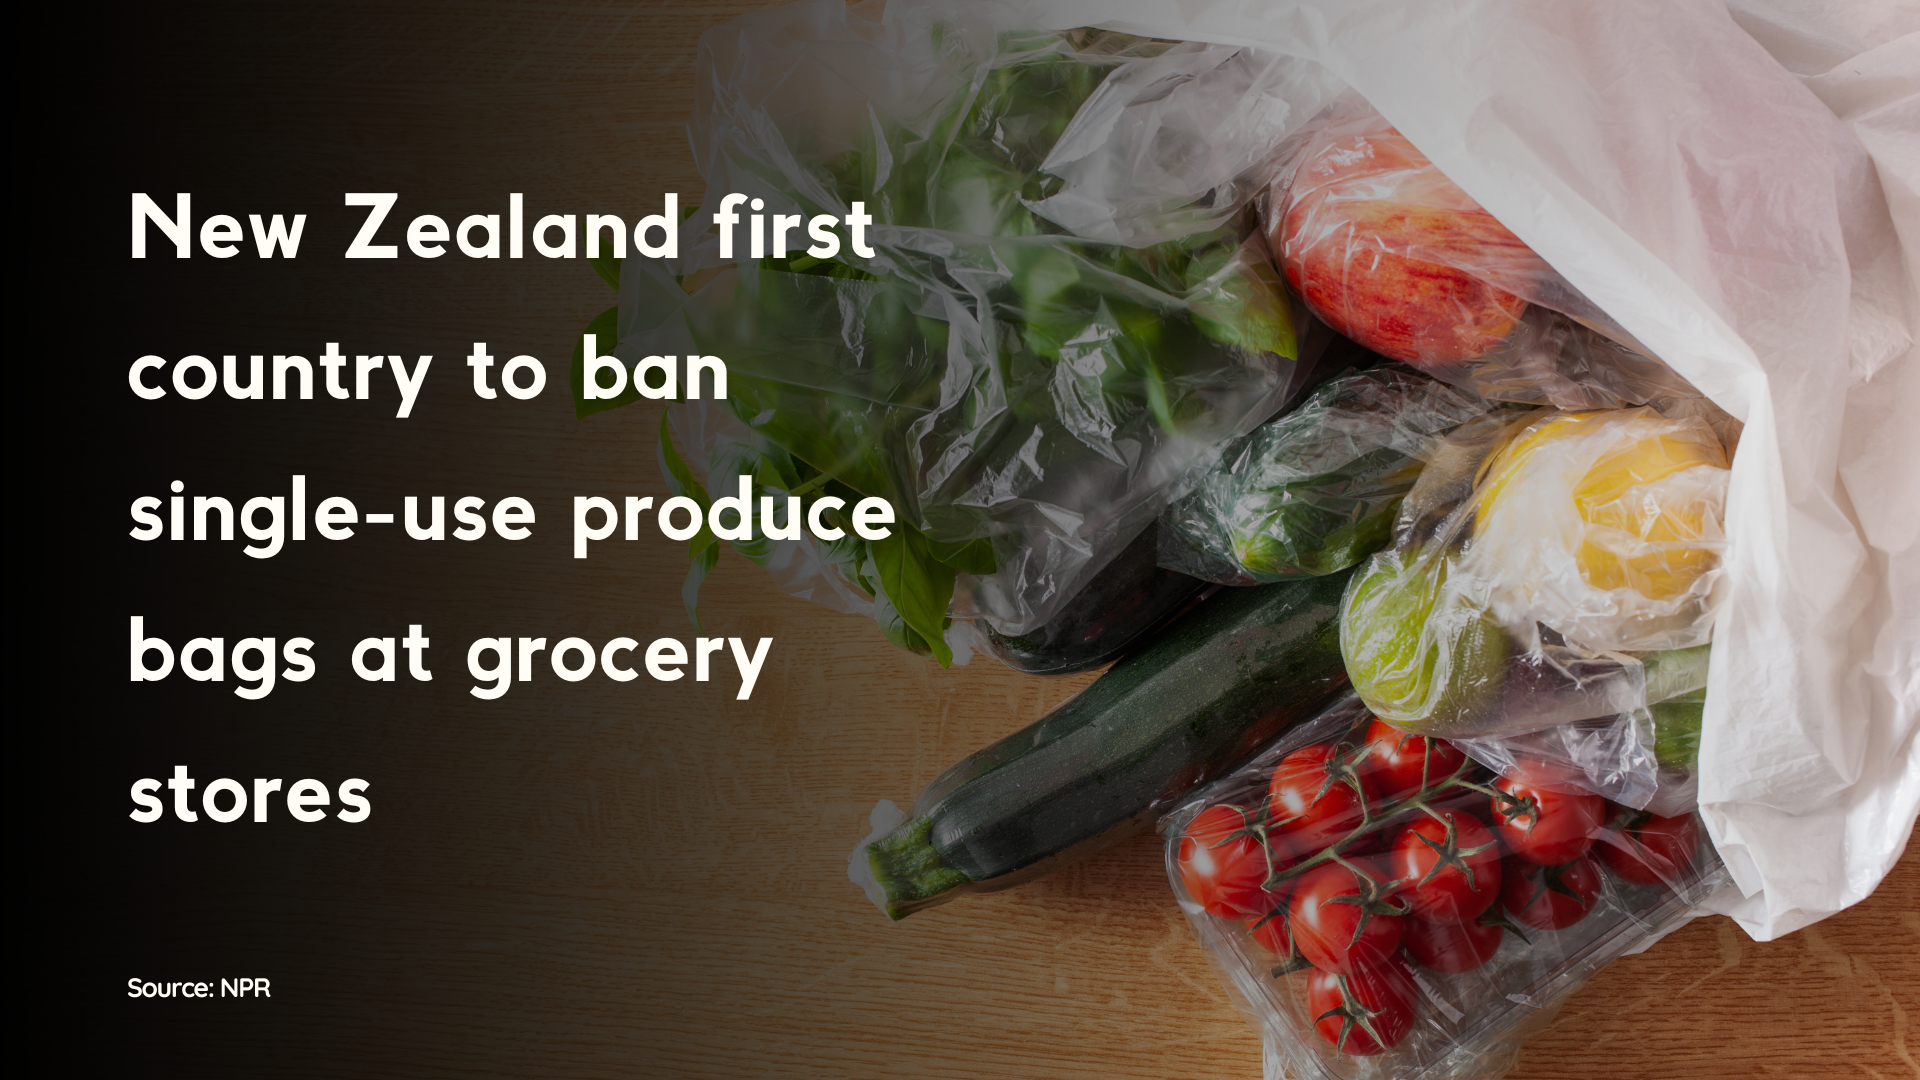 New Zealand first country to ban single-use produce bags at grocery stores